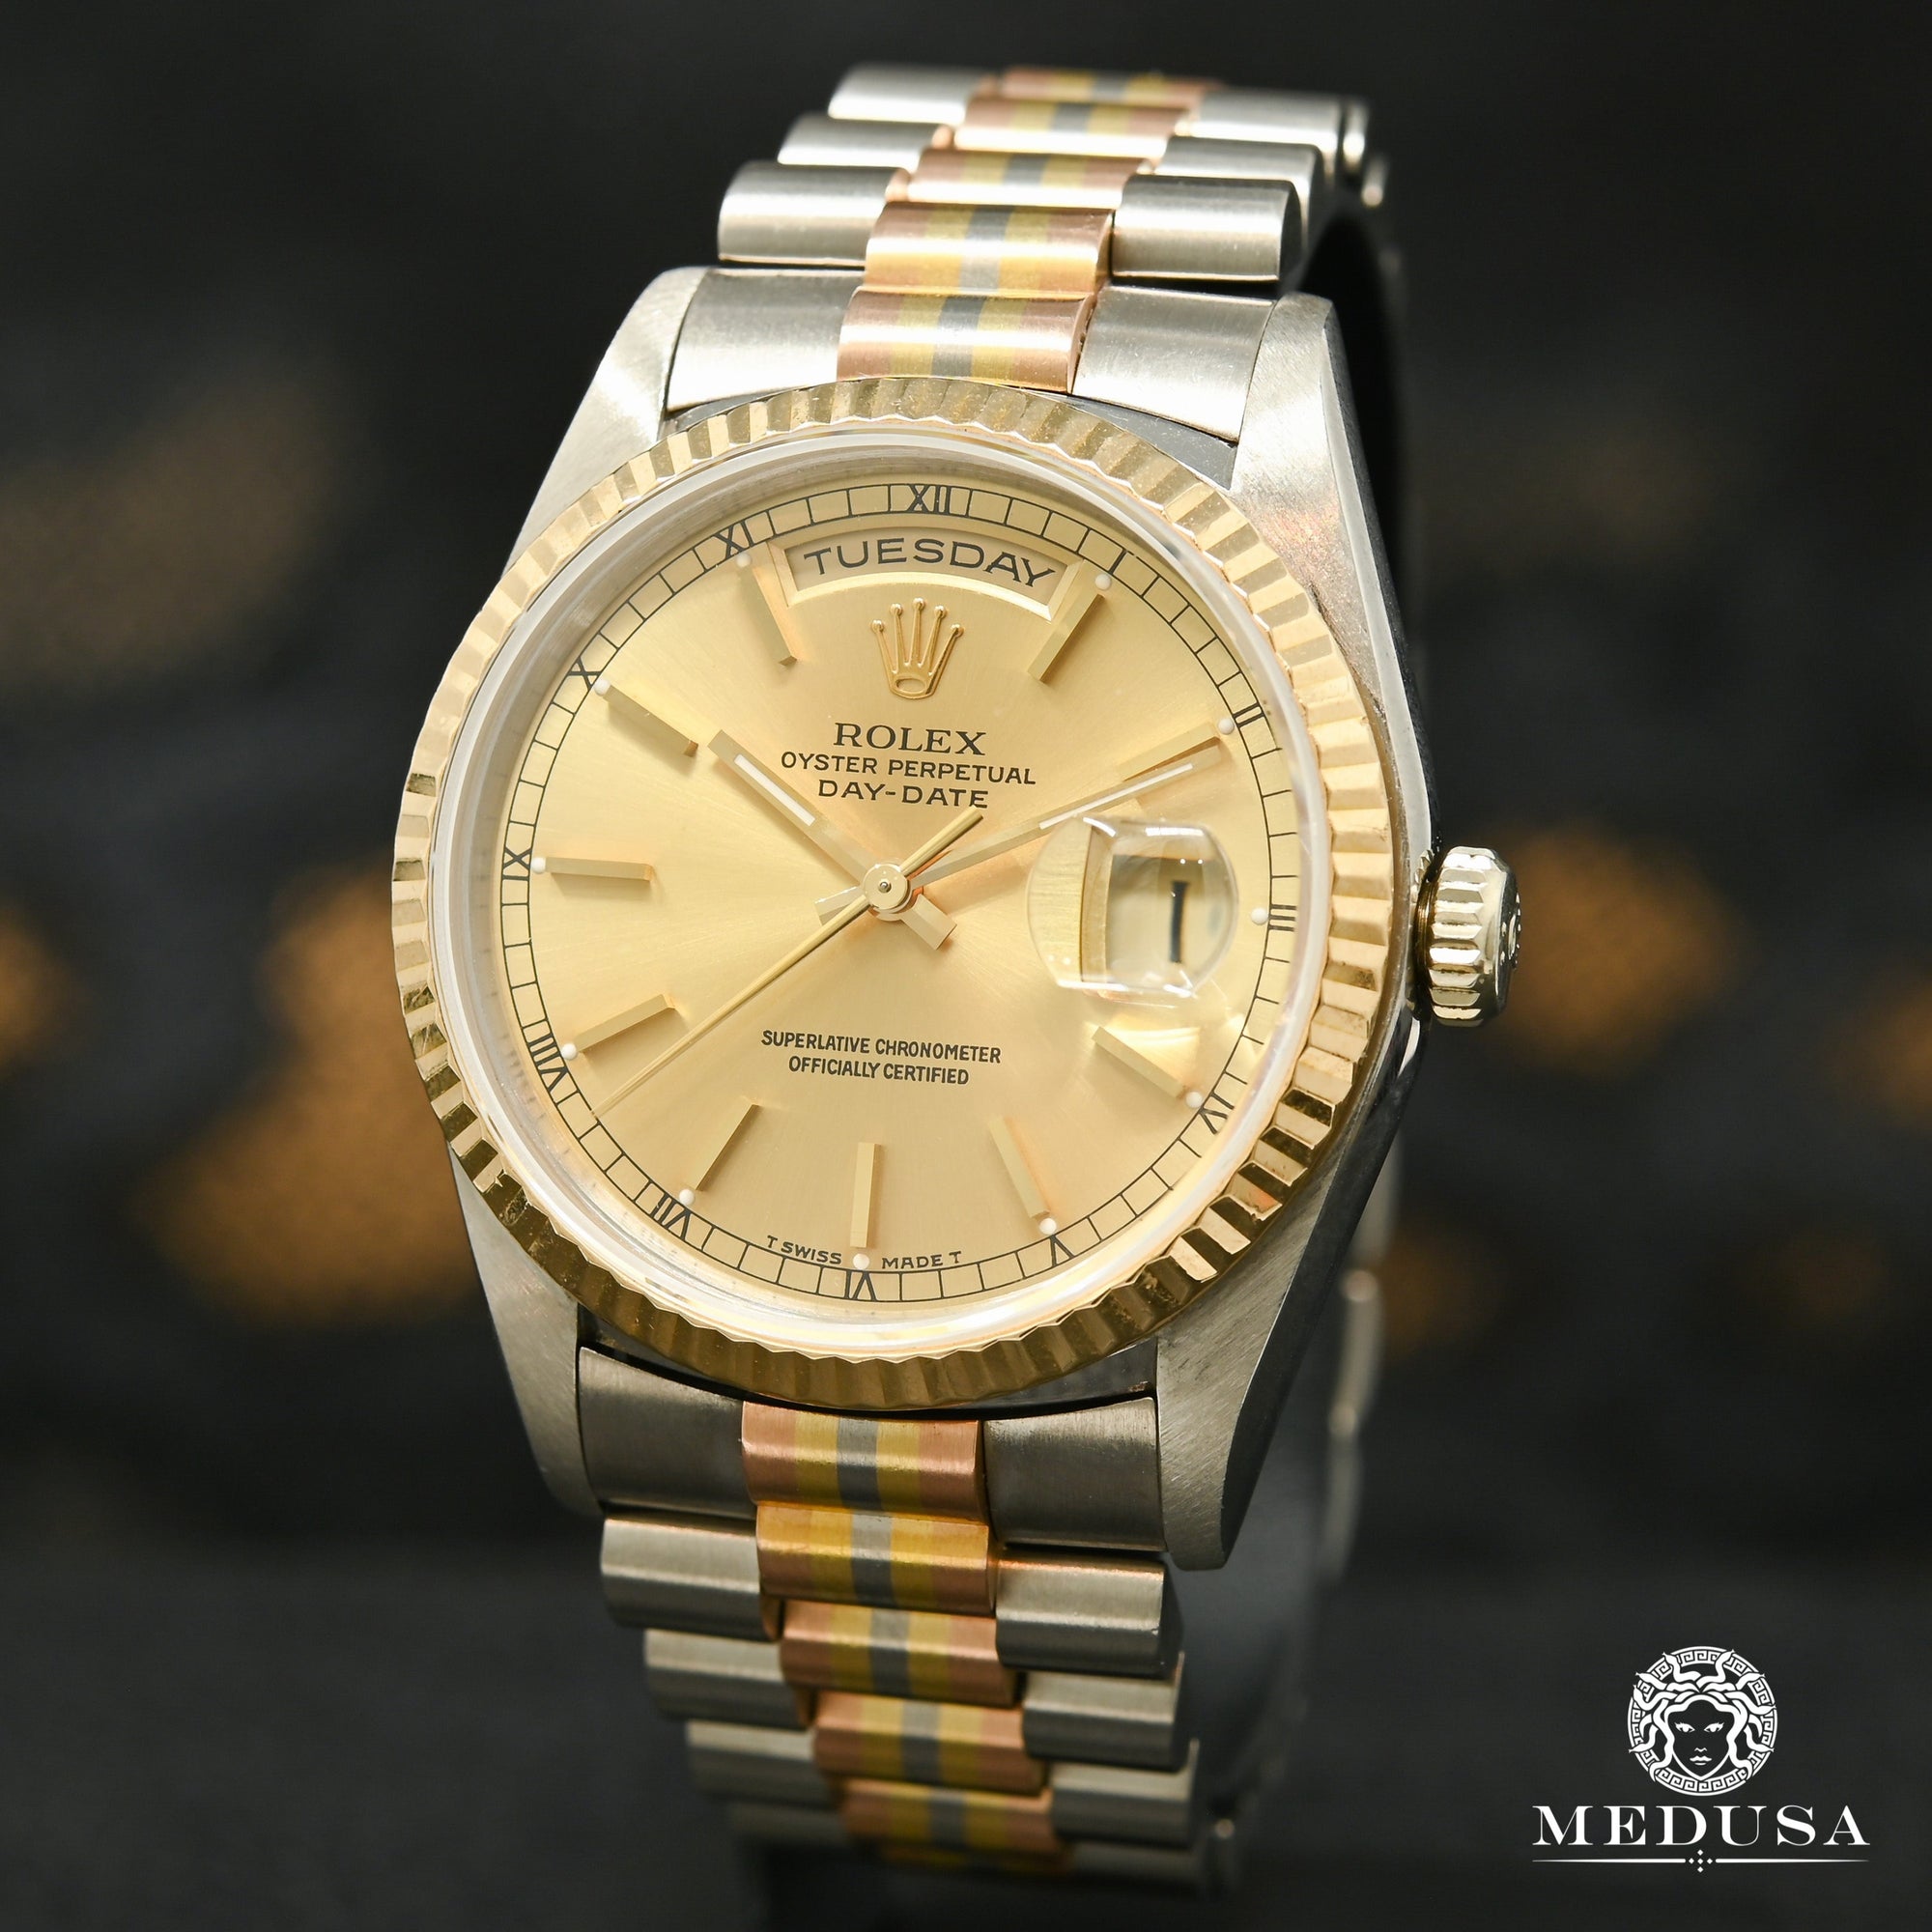 Montre Rolex | Montre Homme Rolex President Day-Date 36mm - Tridor Or 3 Tons